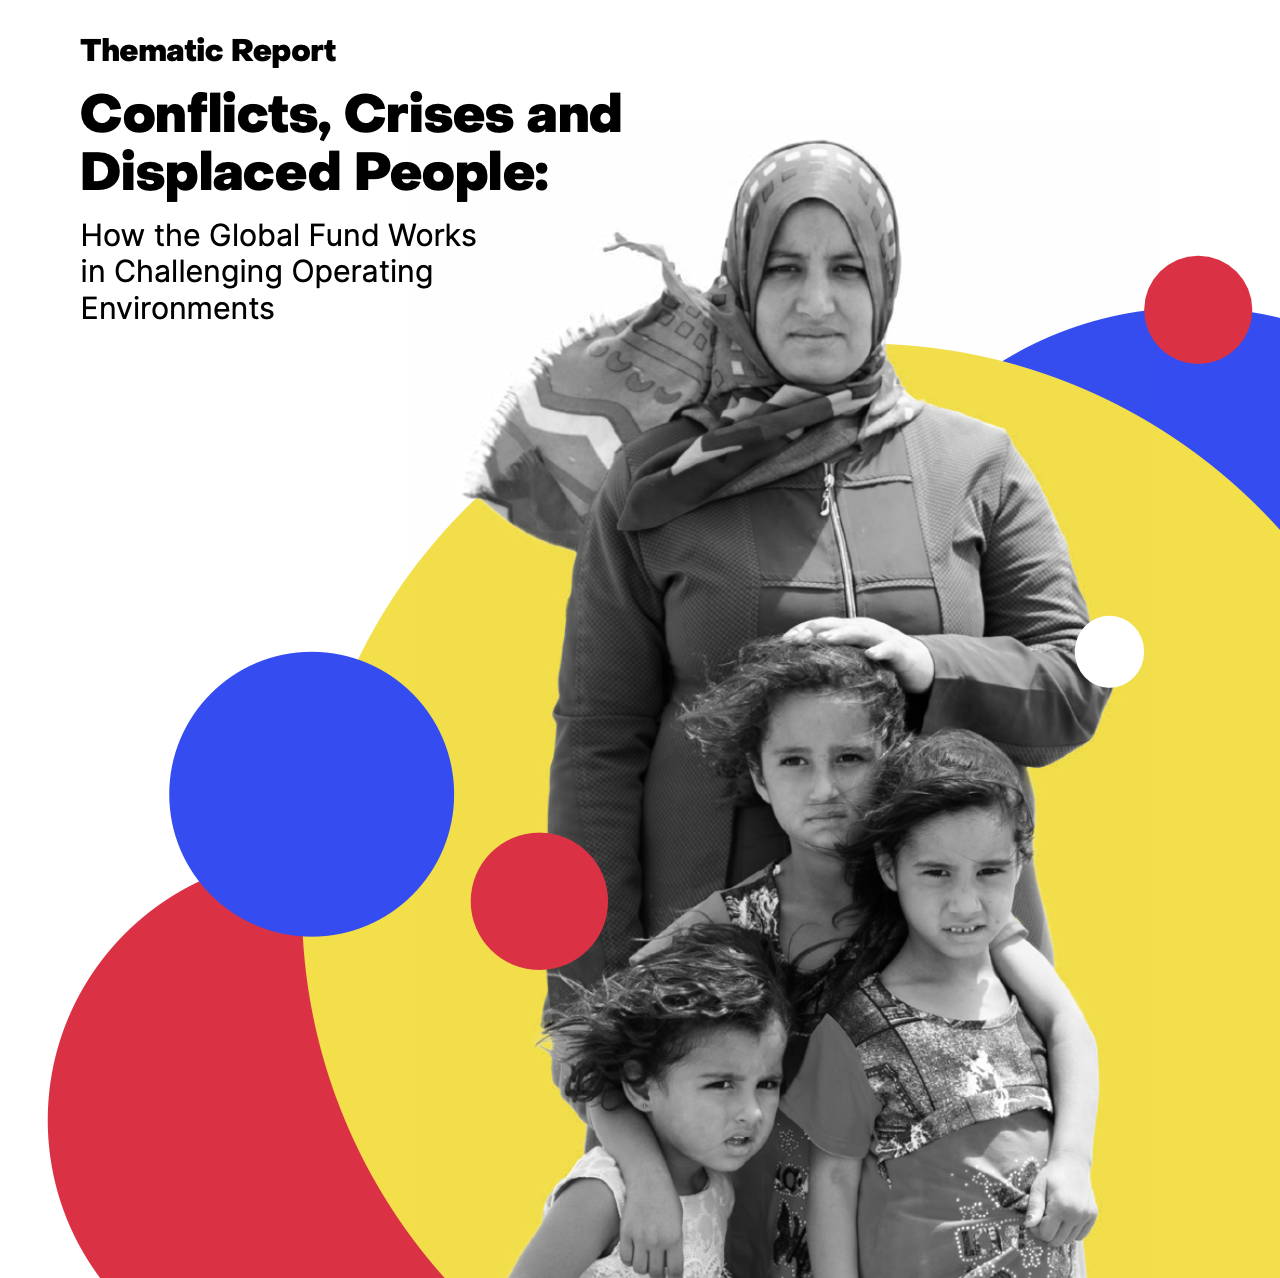 Conflicts, Crises and Displaced People: How the Global Fund Works in Challenging Operating Environments